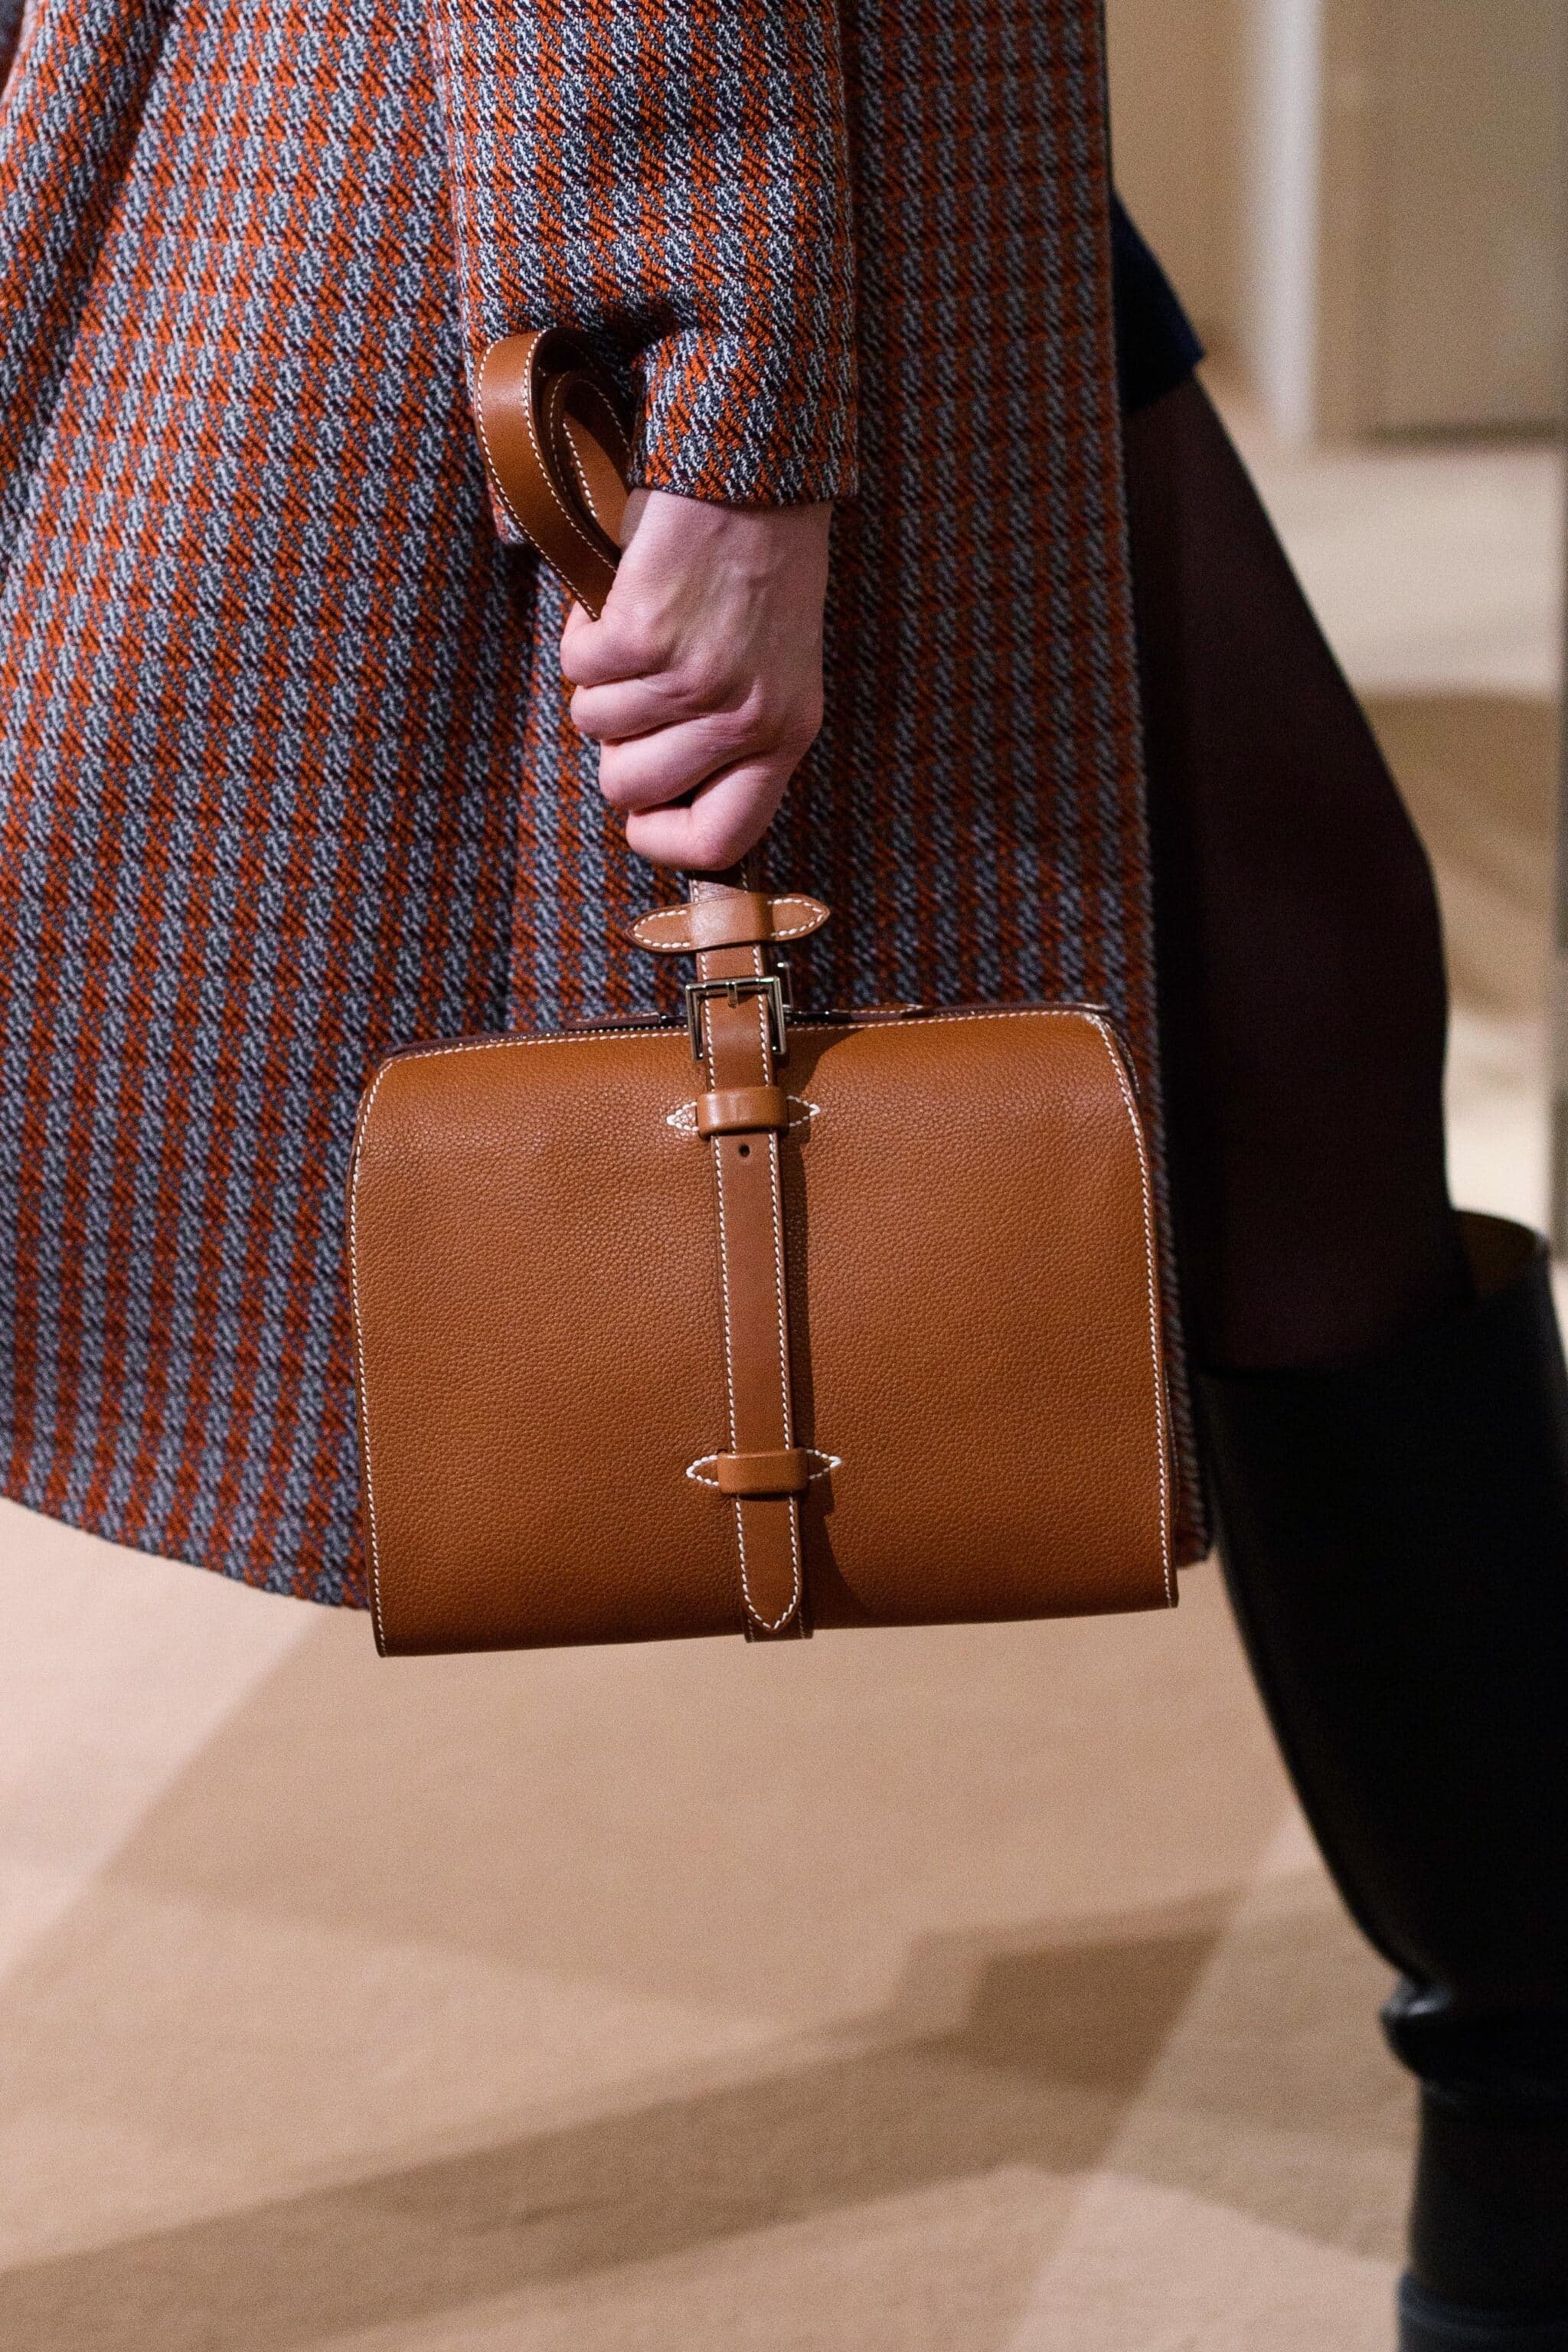 Hermes Pre-Fall 2019 Runway Bag Collection | Spotted Fashion